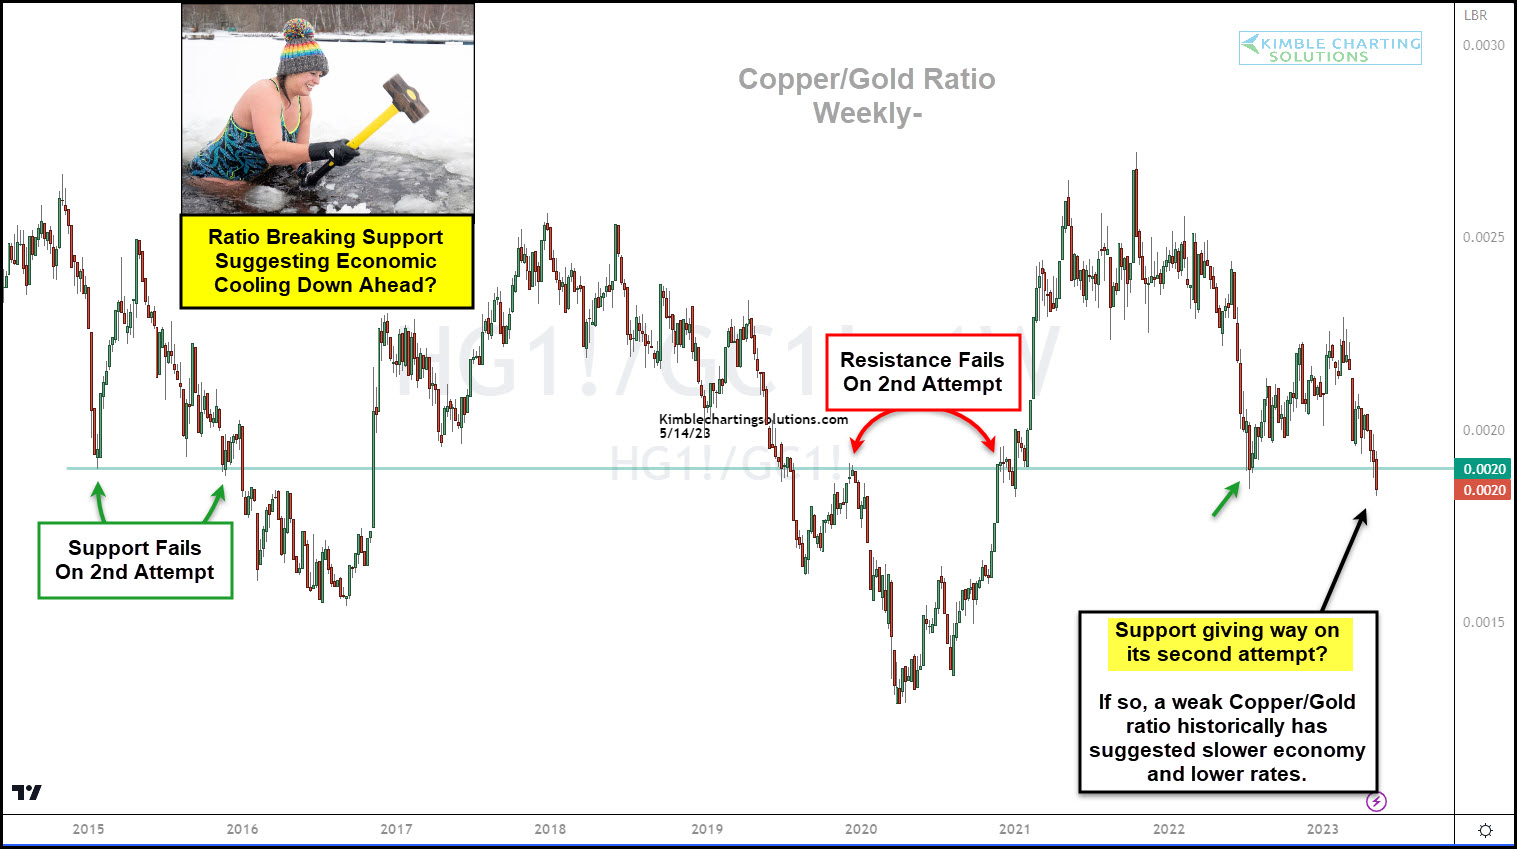 Copper/Gold Ratio Weekly Chart